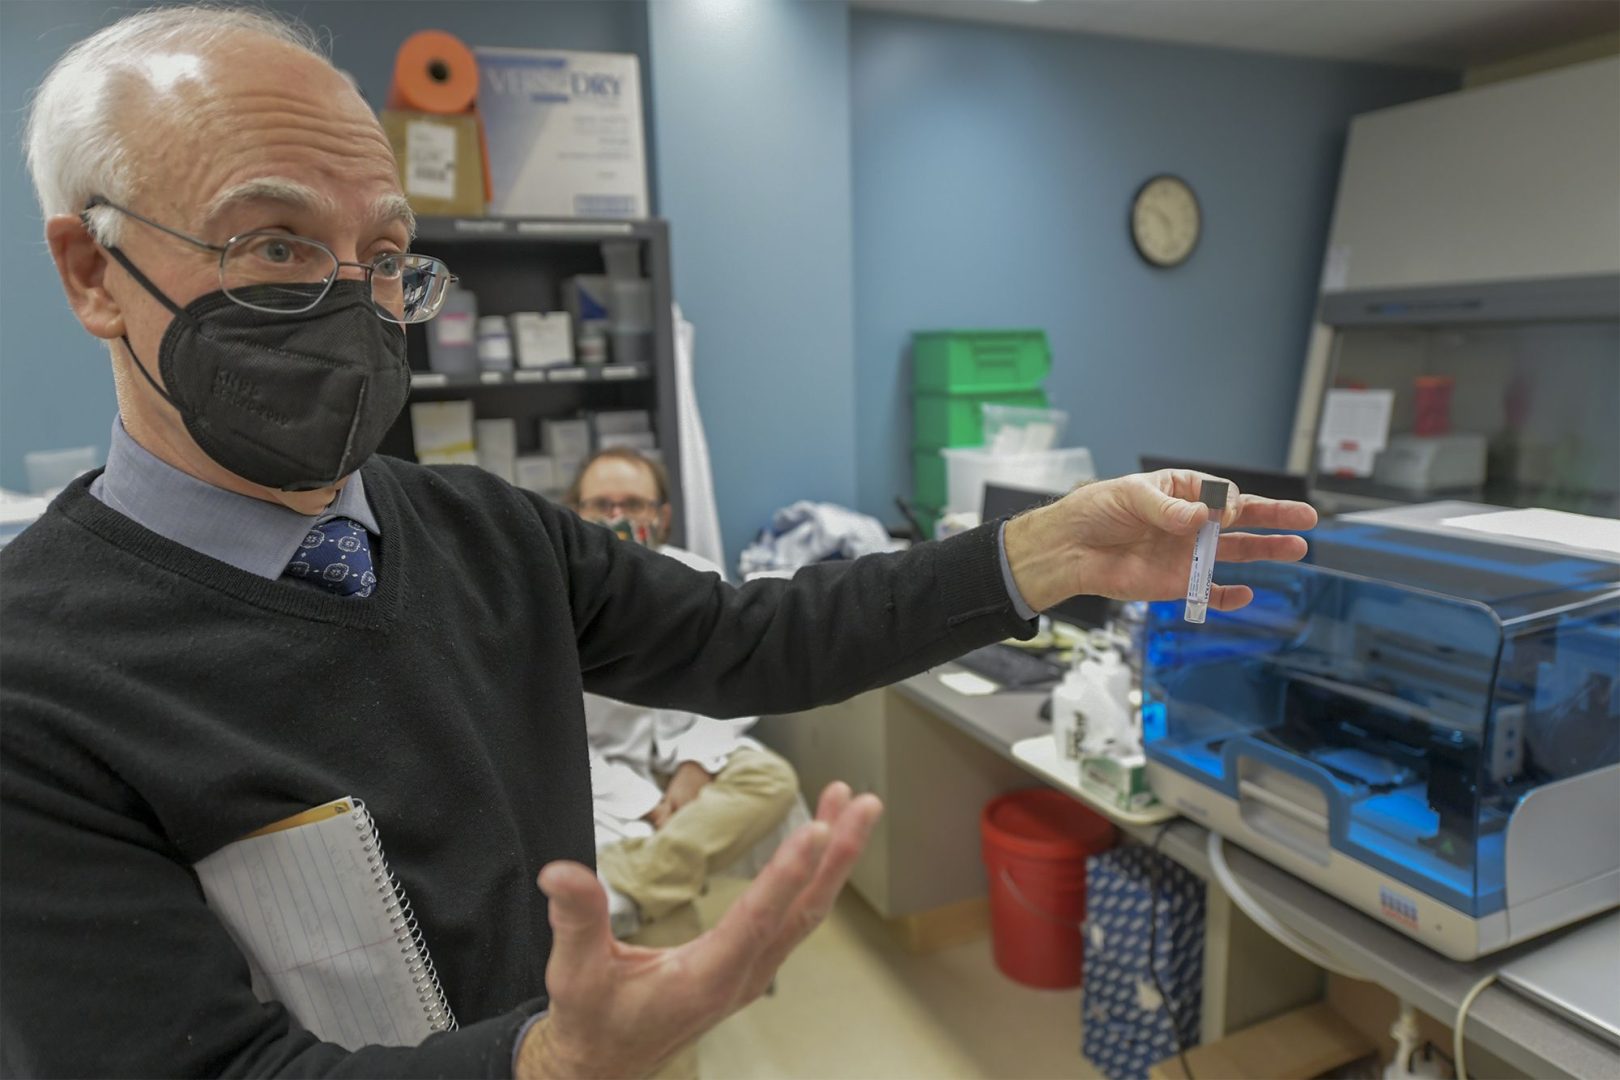 Public Health Lab Director Robert Wadowsky oversees the Allegheny County public health lab system. For the past nearly two years, the labs have handled COVID-19 tests from county-run facilities, including the jail and nursing homes.